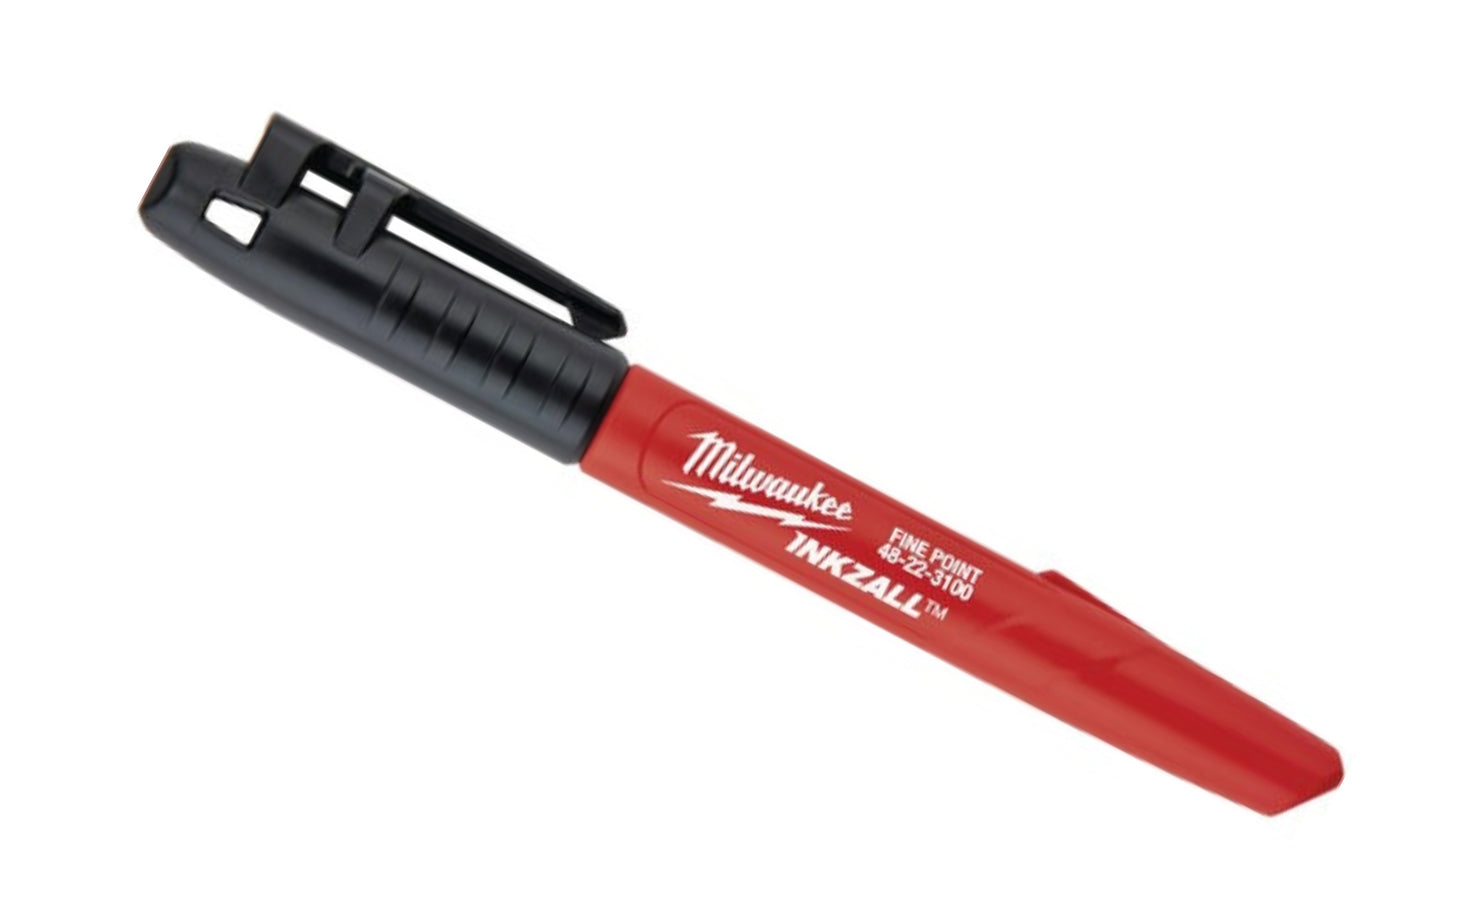 Milwaukee Inkzall Jobsite Marker - Black. Jobsite permanent markers feature clog resistant tips and the ability to write through dusty, wet or oily surfaces. Durable marker pens are designed for writing on rough surfaces. 48-22-3100. 